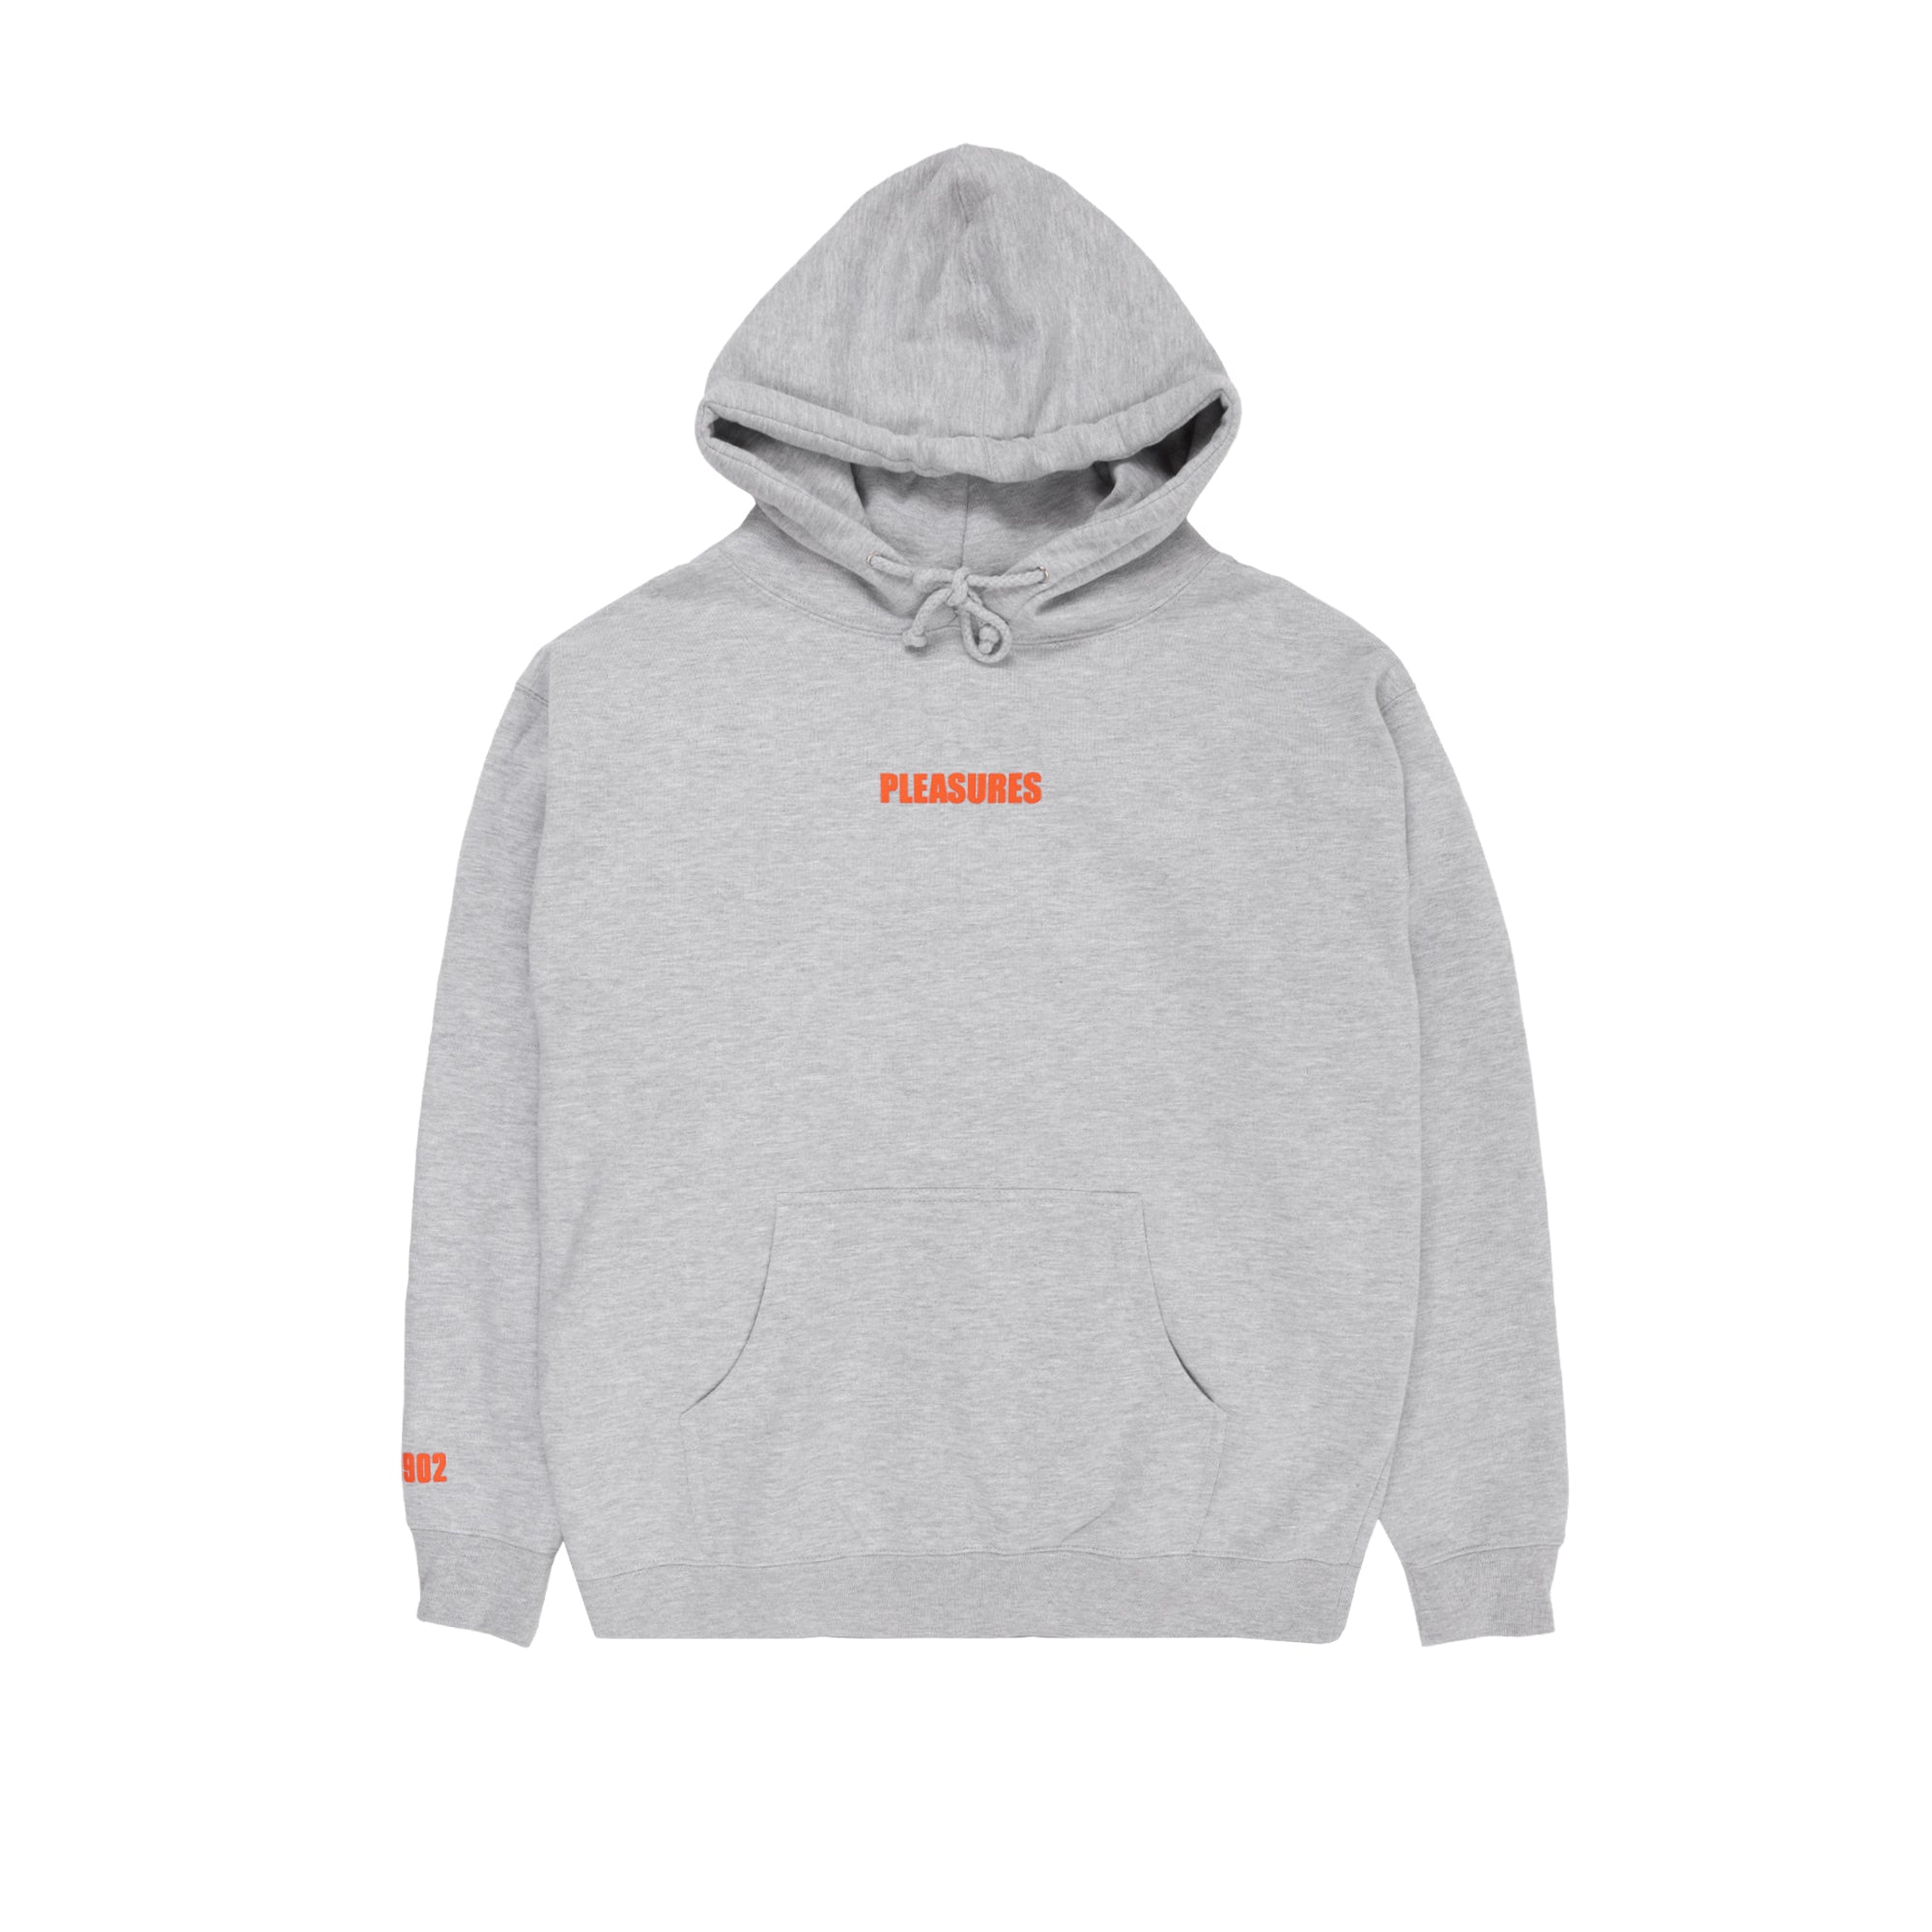 Brand New Supreme x Nike Hoodie Sz Large for $250 In Store Now